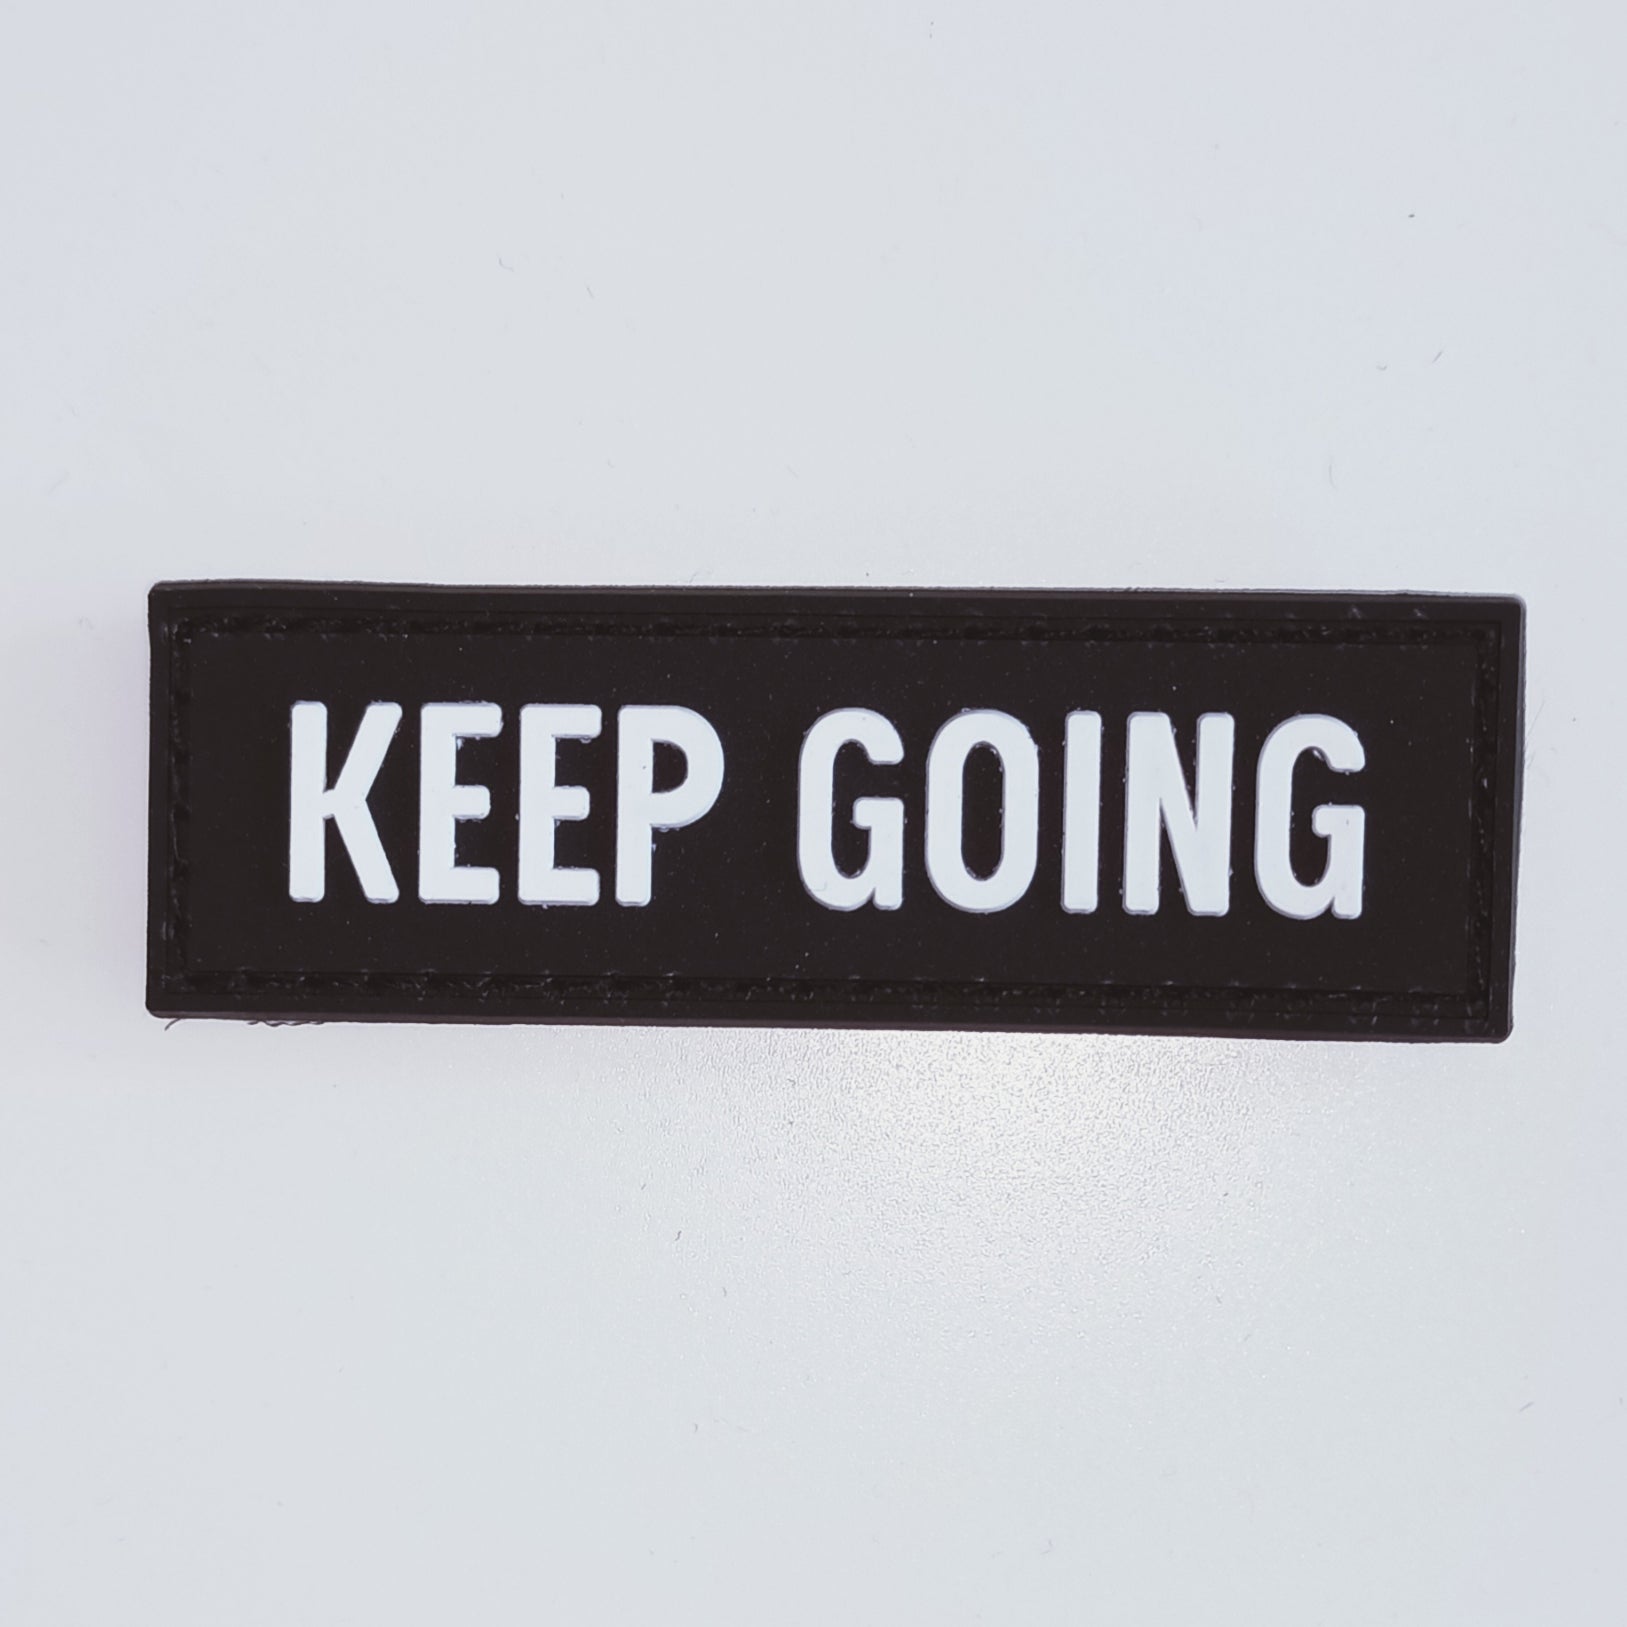 Keep Going - Velcro Patch from Genejack for Genejack WOD